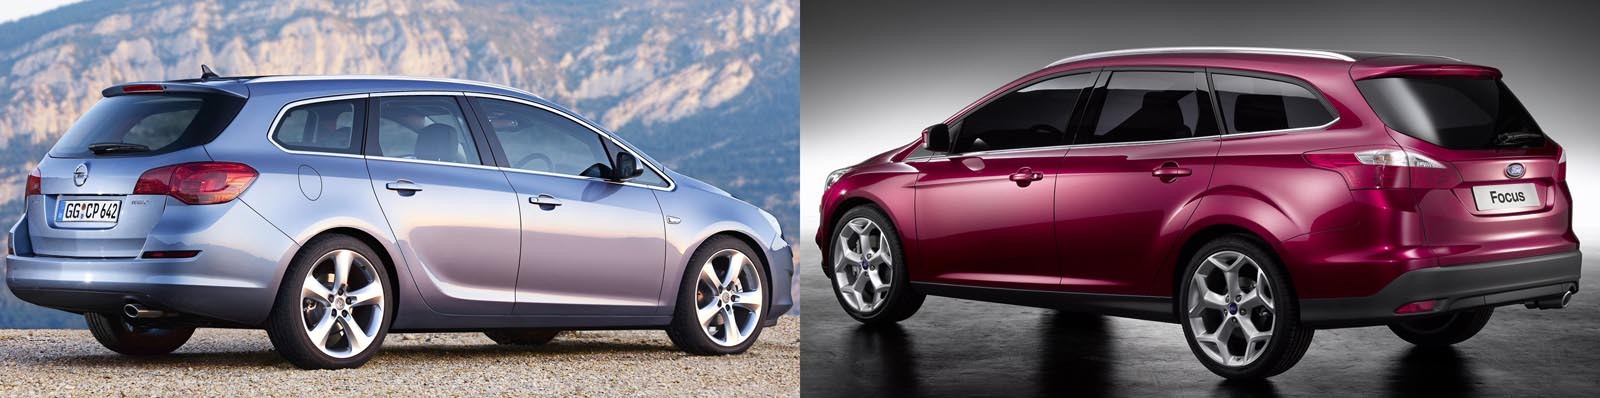 Opel Astra Sports Tourer vs. Ford Focus Wagon